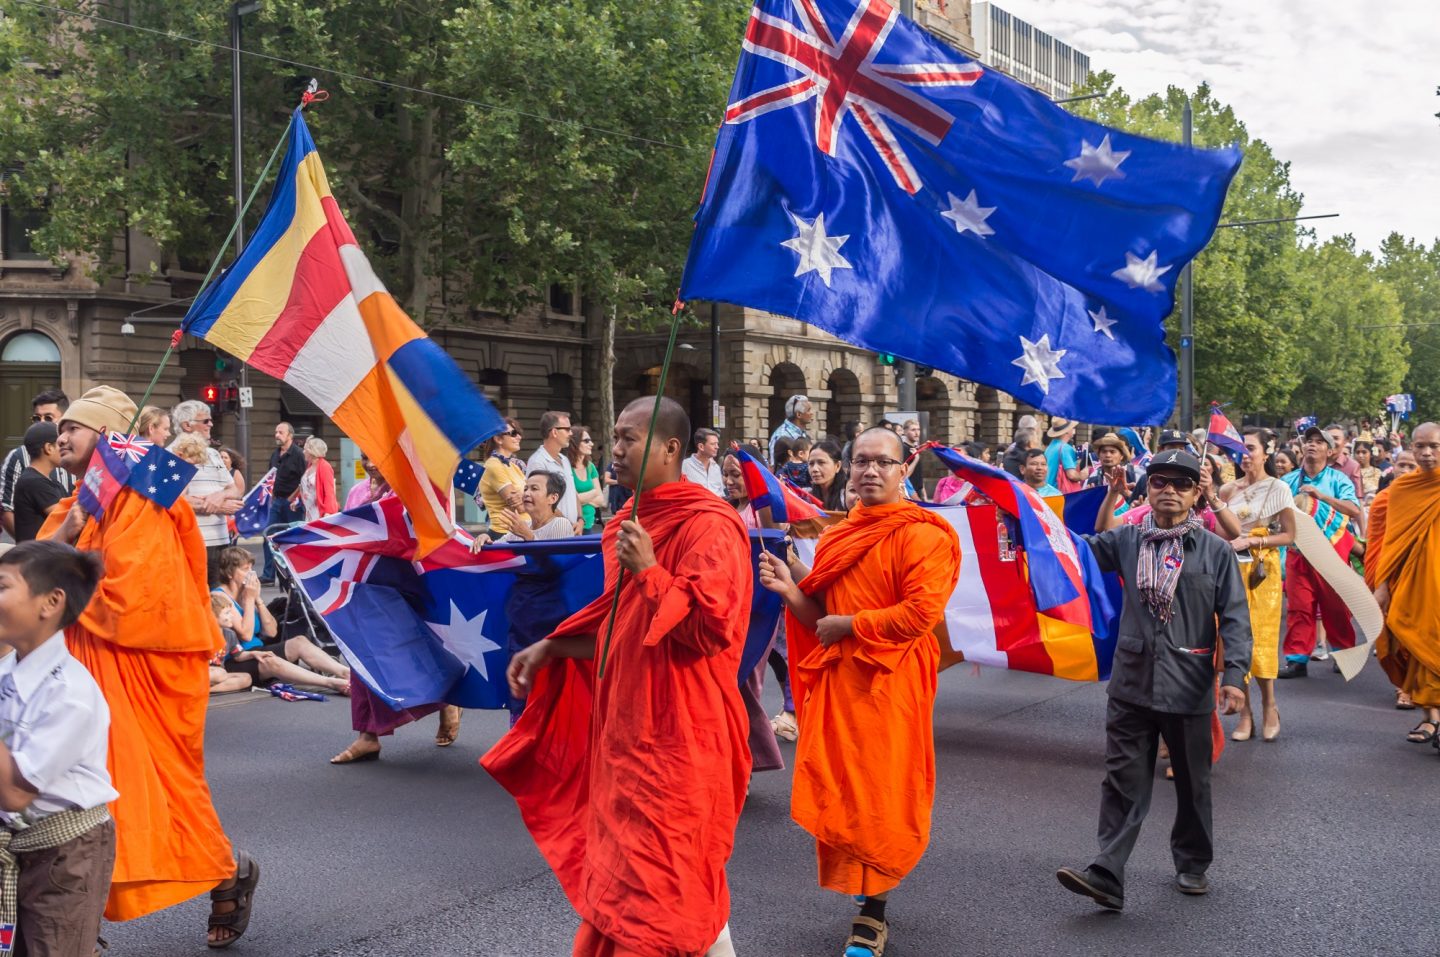 The 2019 Australia Day parade makes its way down King William Street